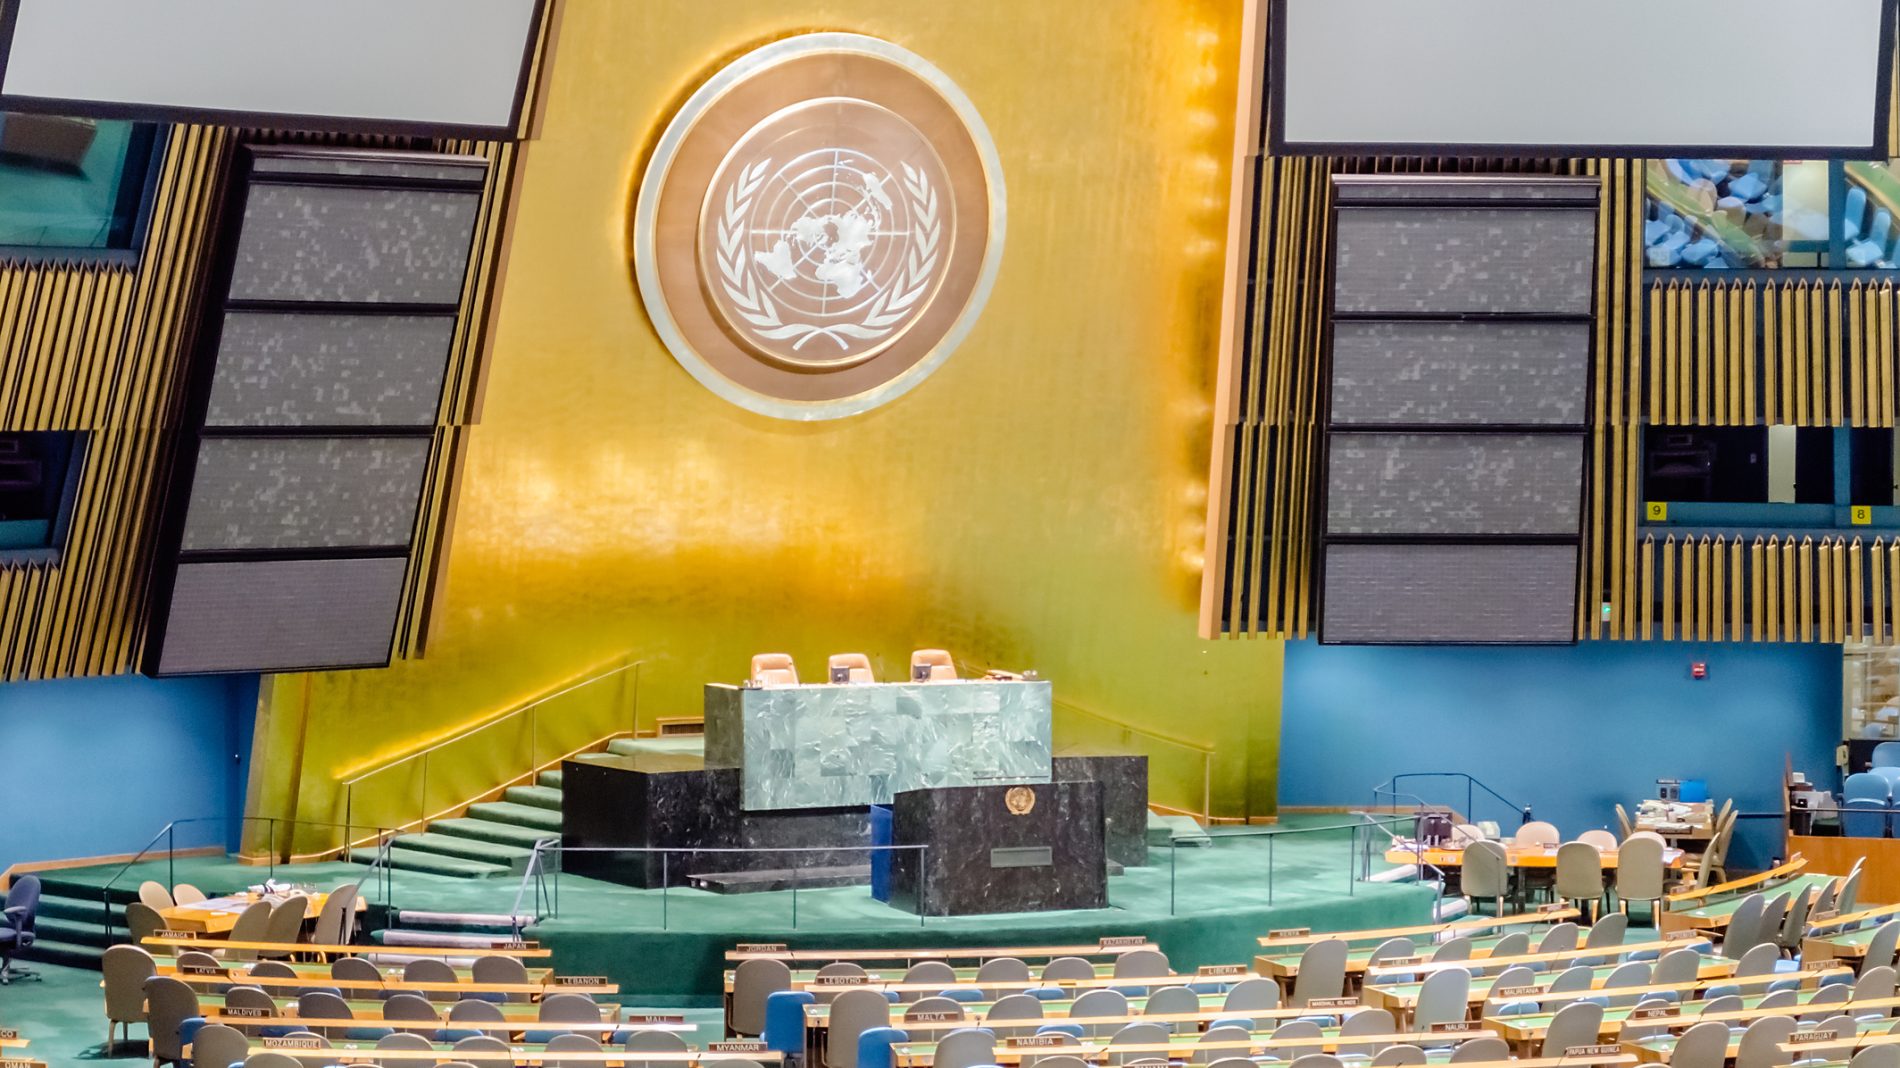 The United Nations general assembly hall.